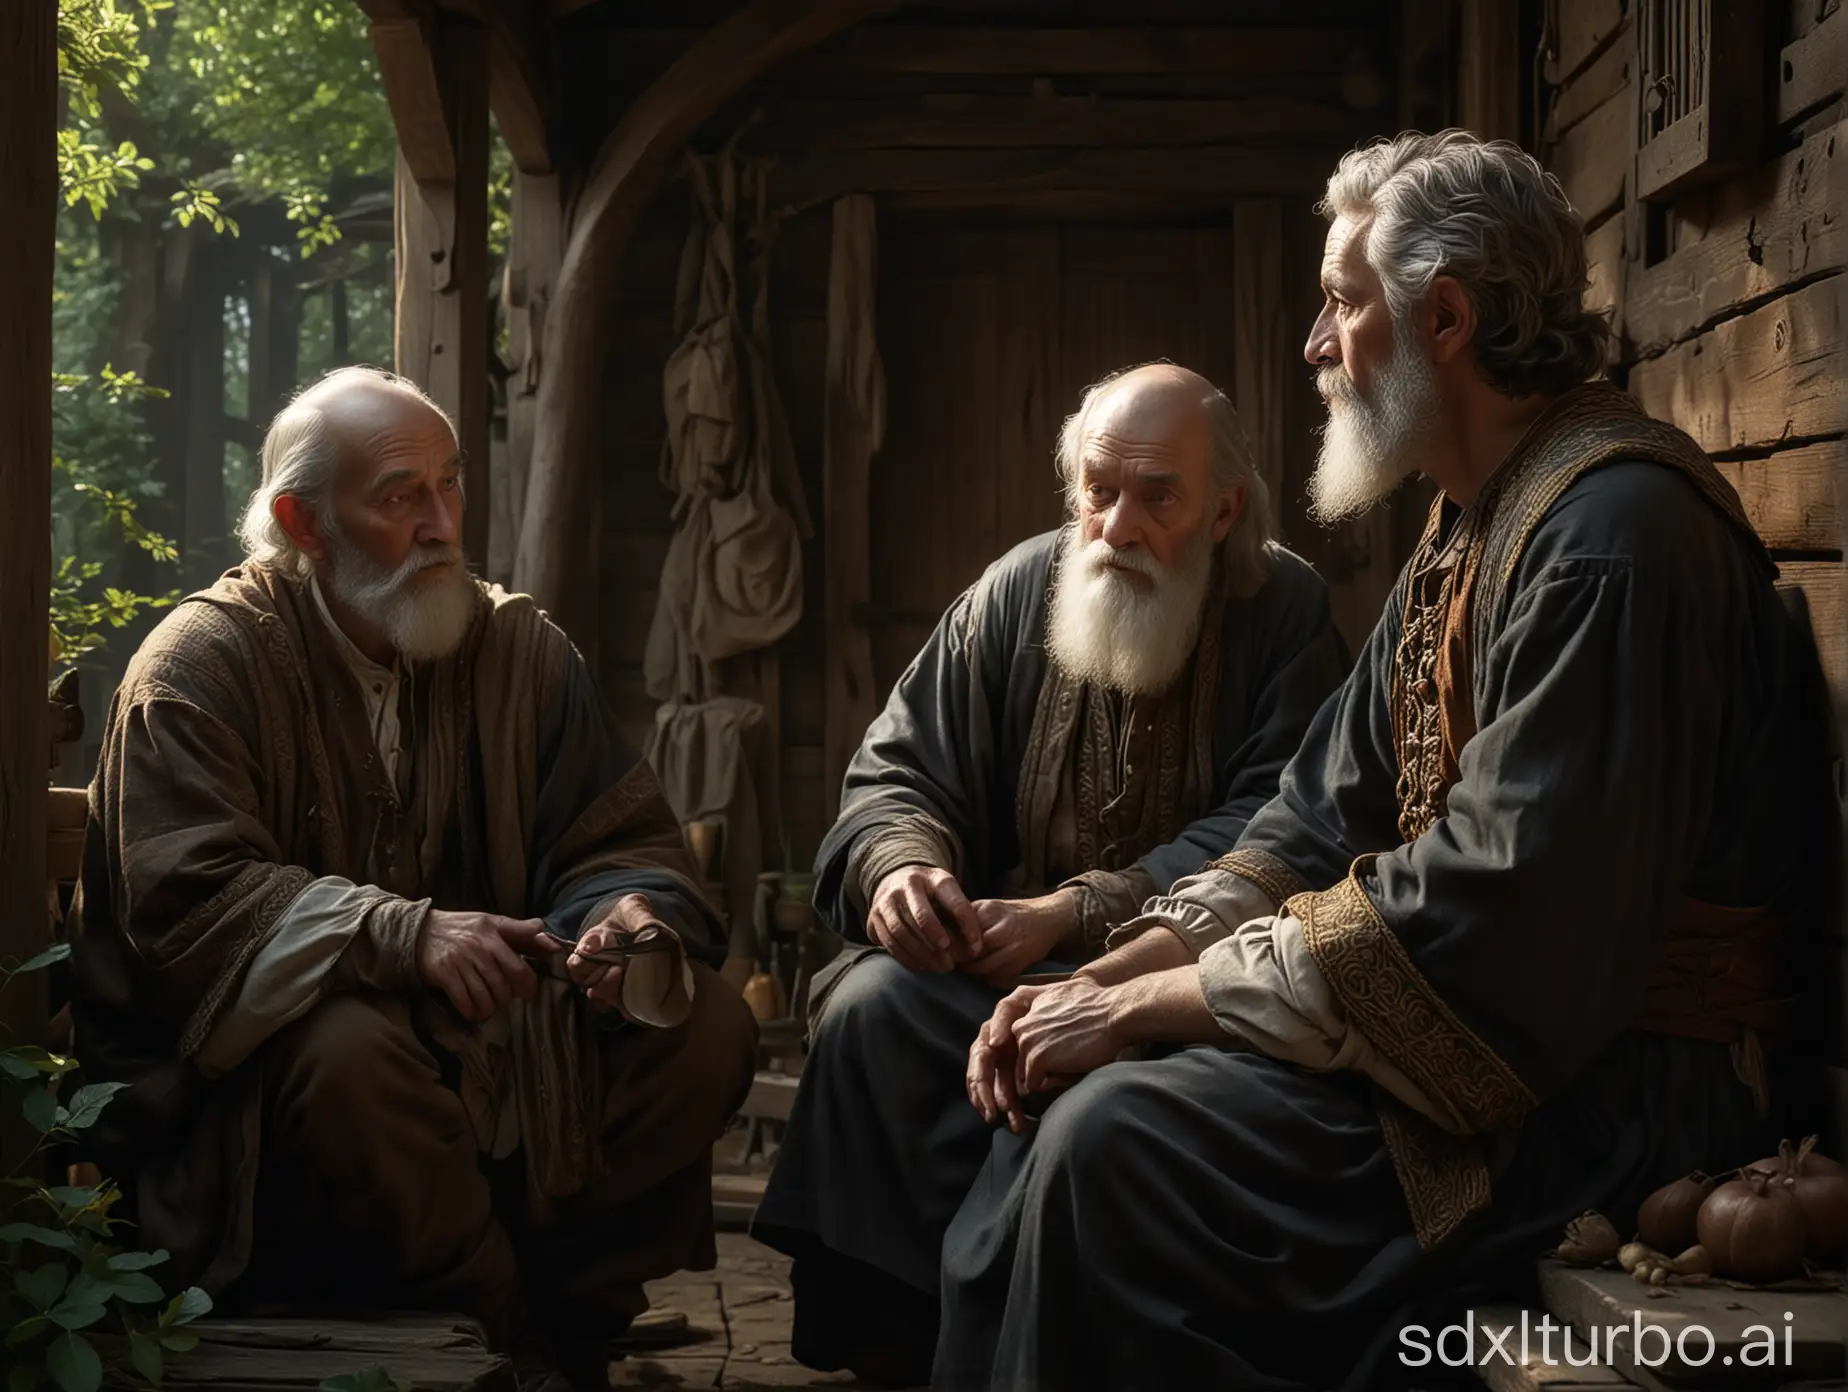 Medieval-Old-Man-Conversing-with-Two-Boys-by-Wooden-House-in-Forest-Thicket